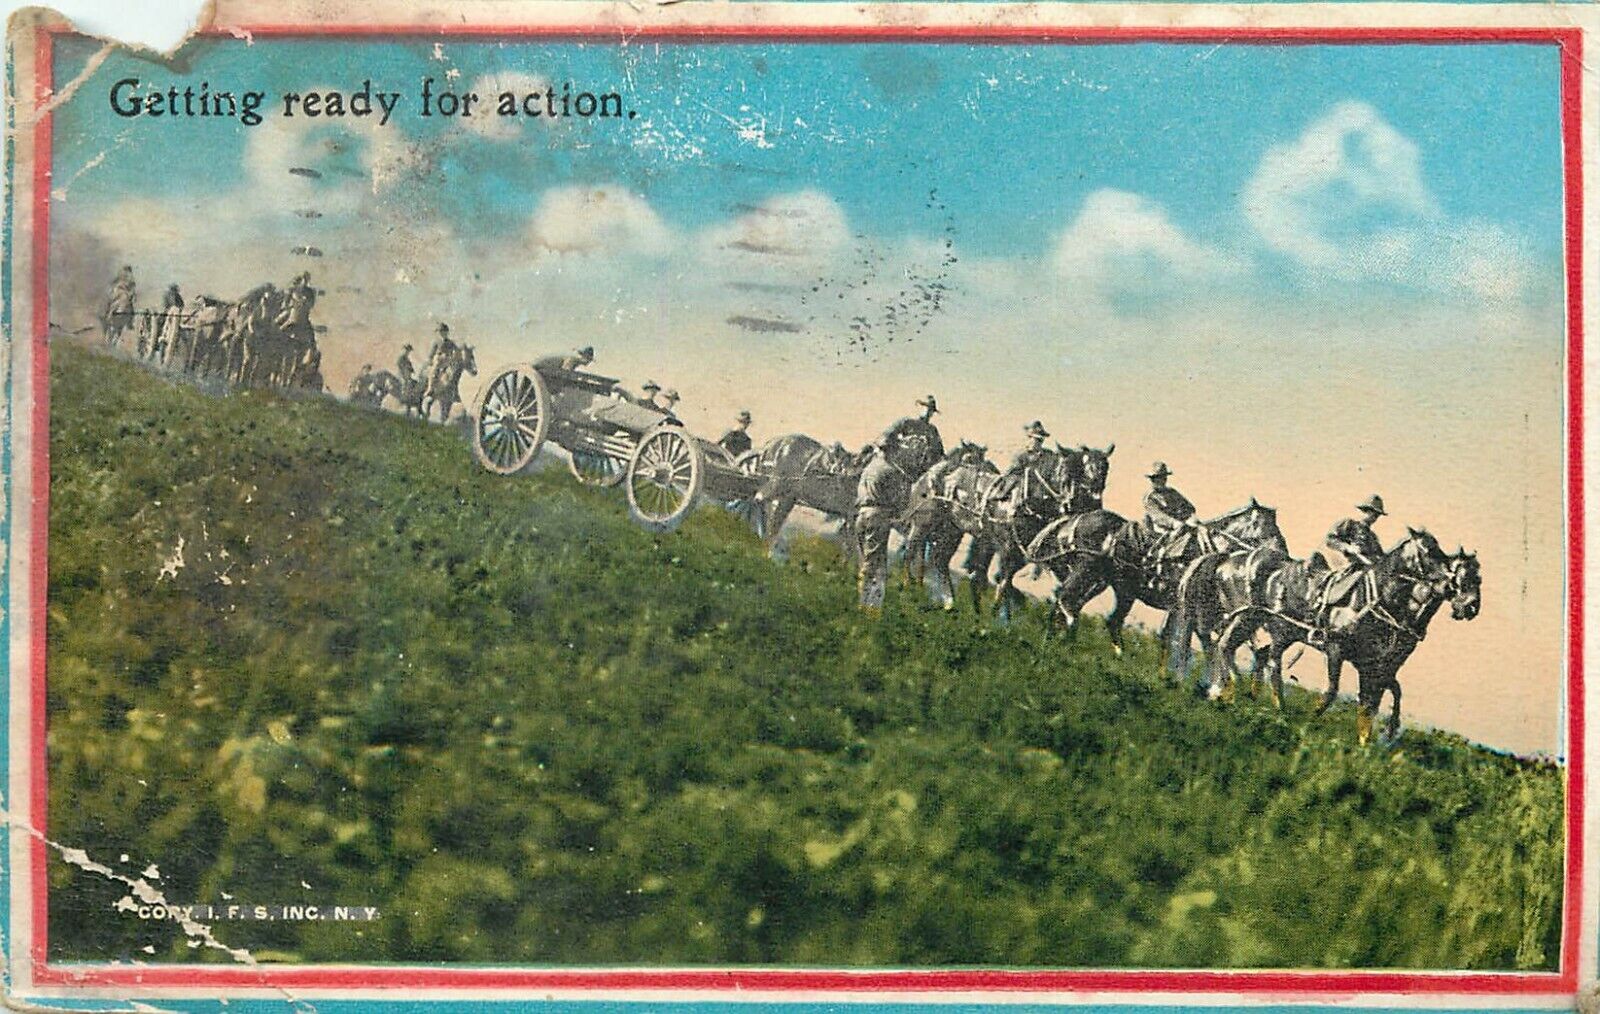 Get Ready for Action Soldiers Horseback Cannons pm 1918 WWI Postcard